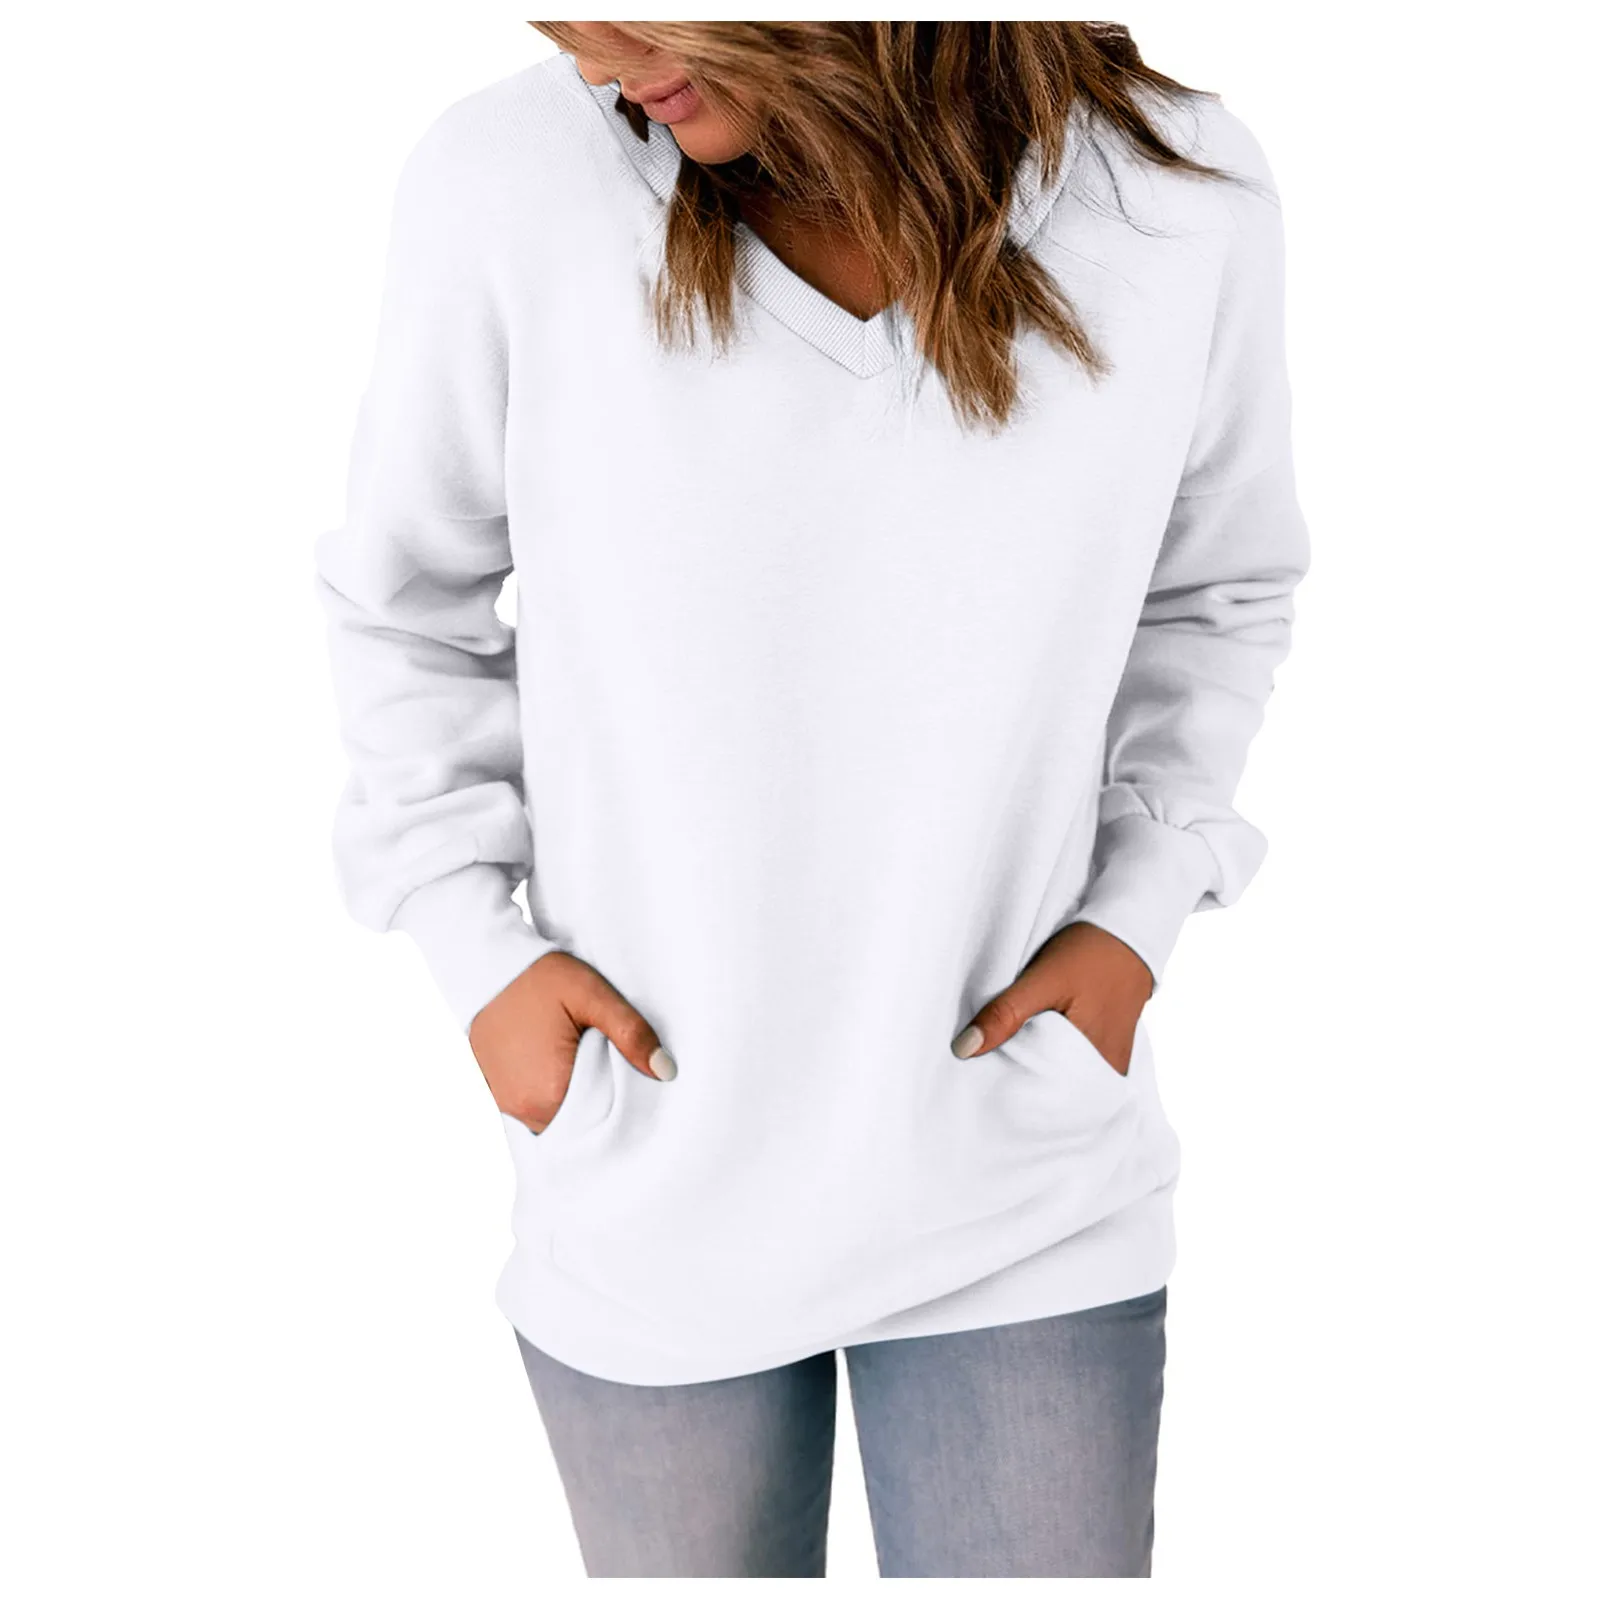 

Womens Casual V Neck Sweatshirt Loose Soft Long Sleeve Pullover Tops Solid Shirts With Side Pockets plus rozmiar topy